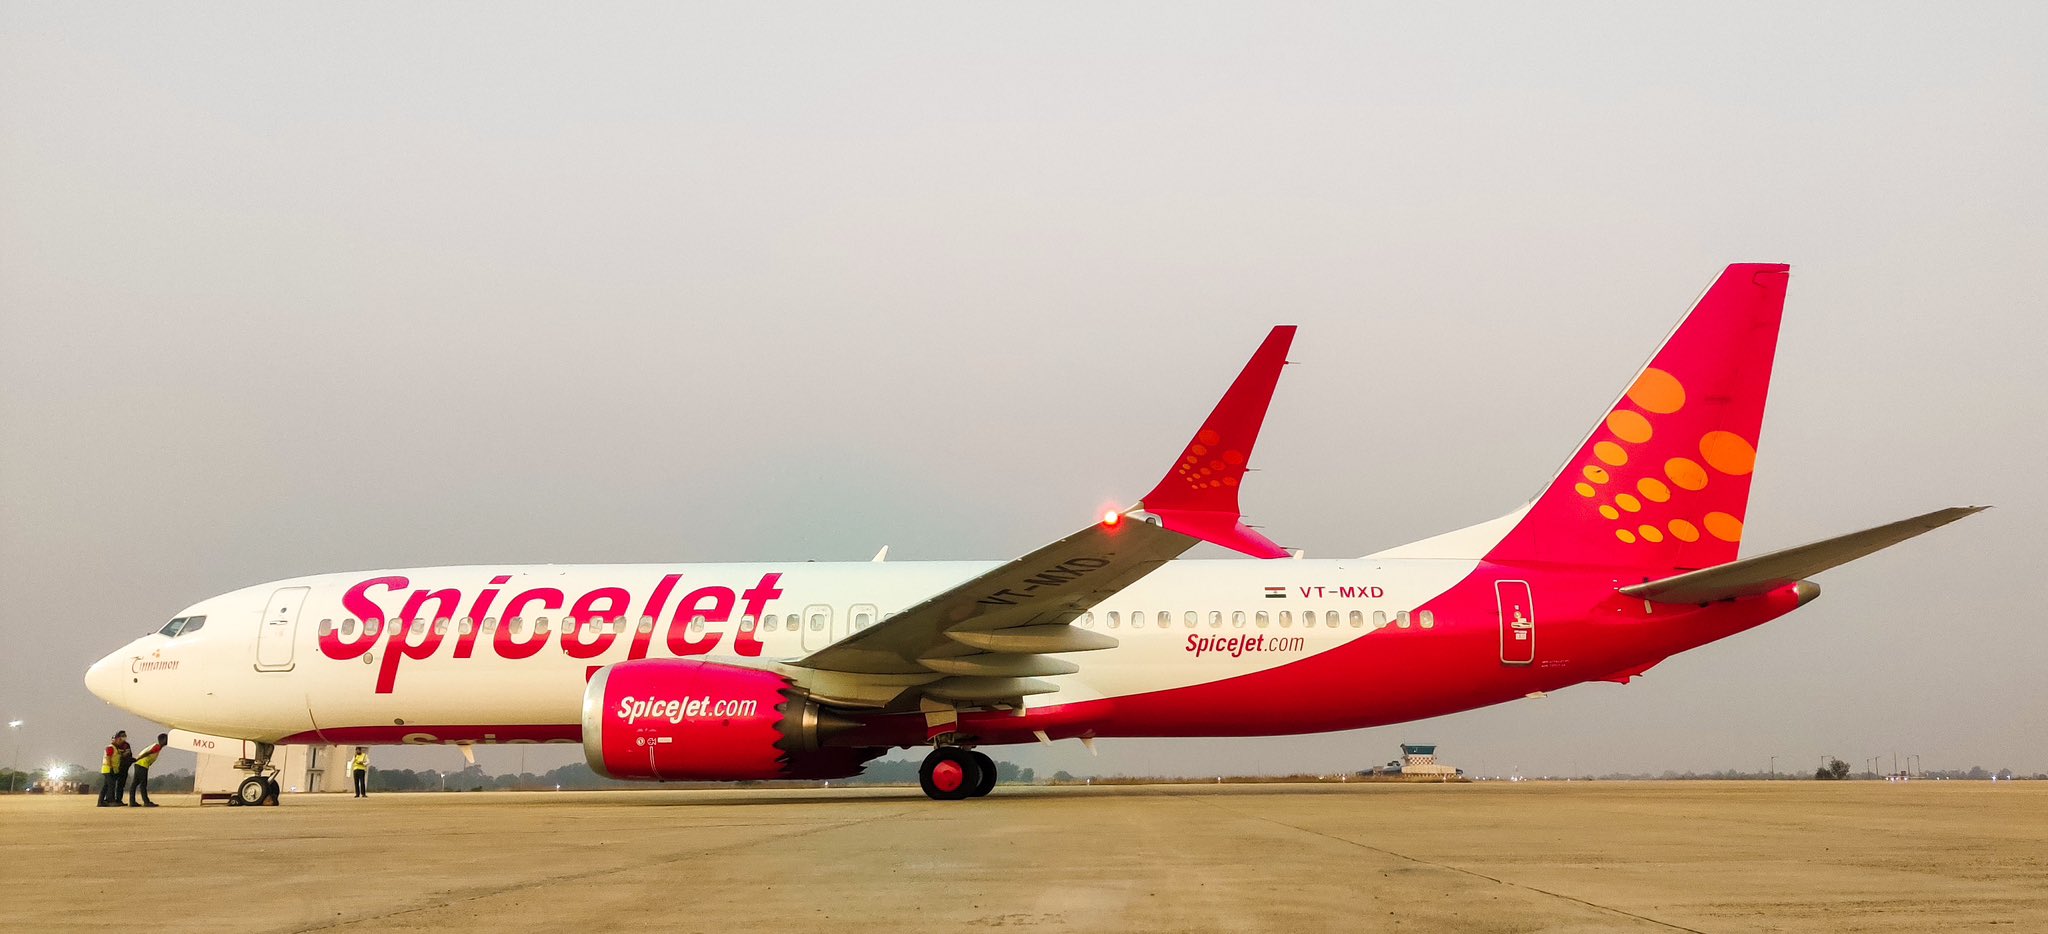 New aircrafts for spicejet